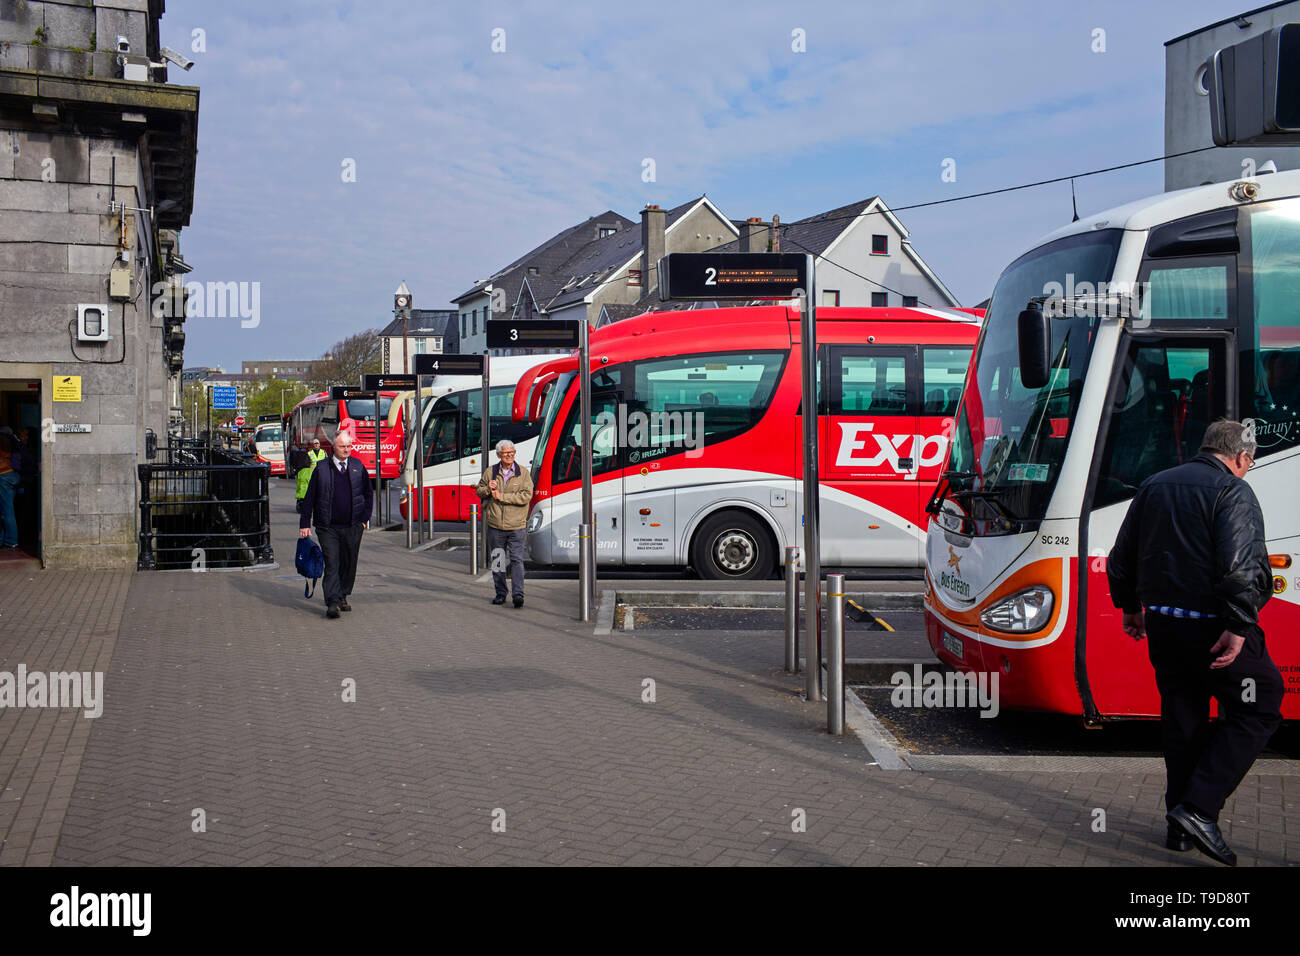 The bus station transport hub in Galway, Ireland Stock Photo - Alamy